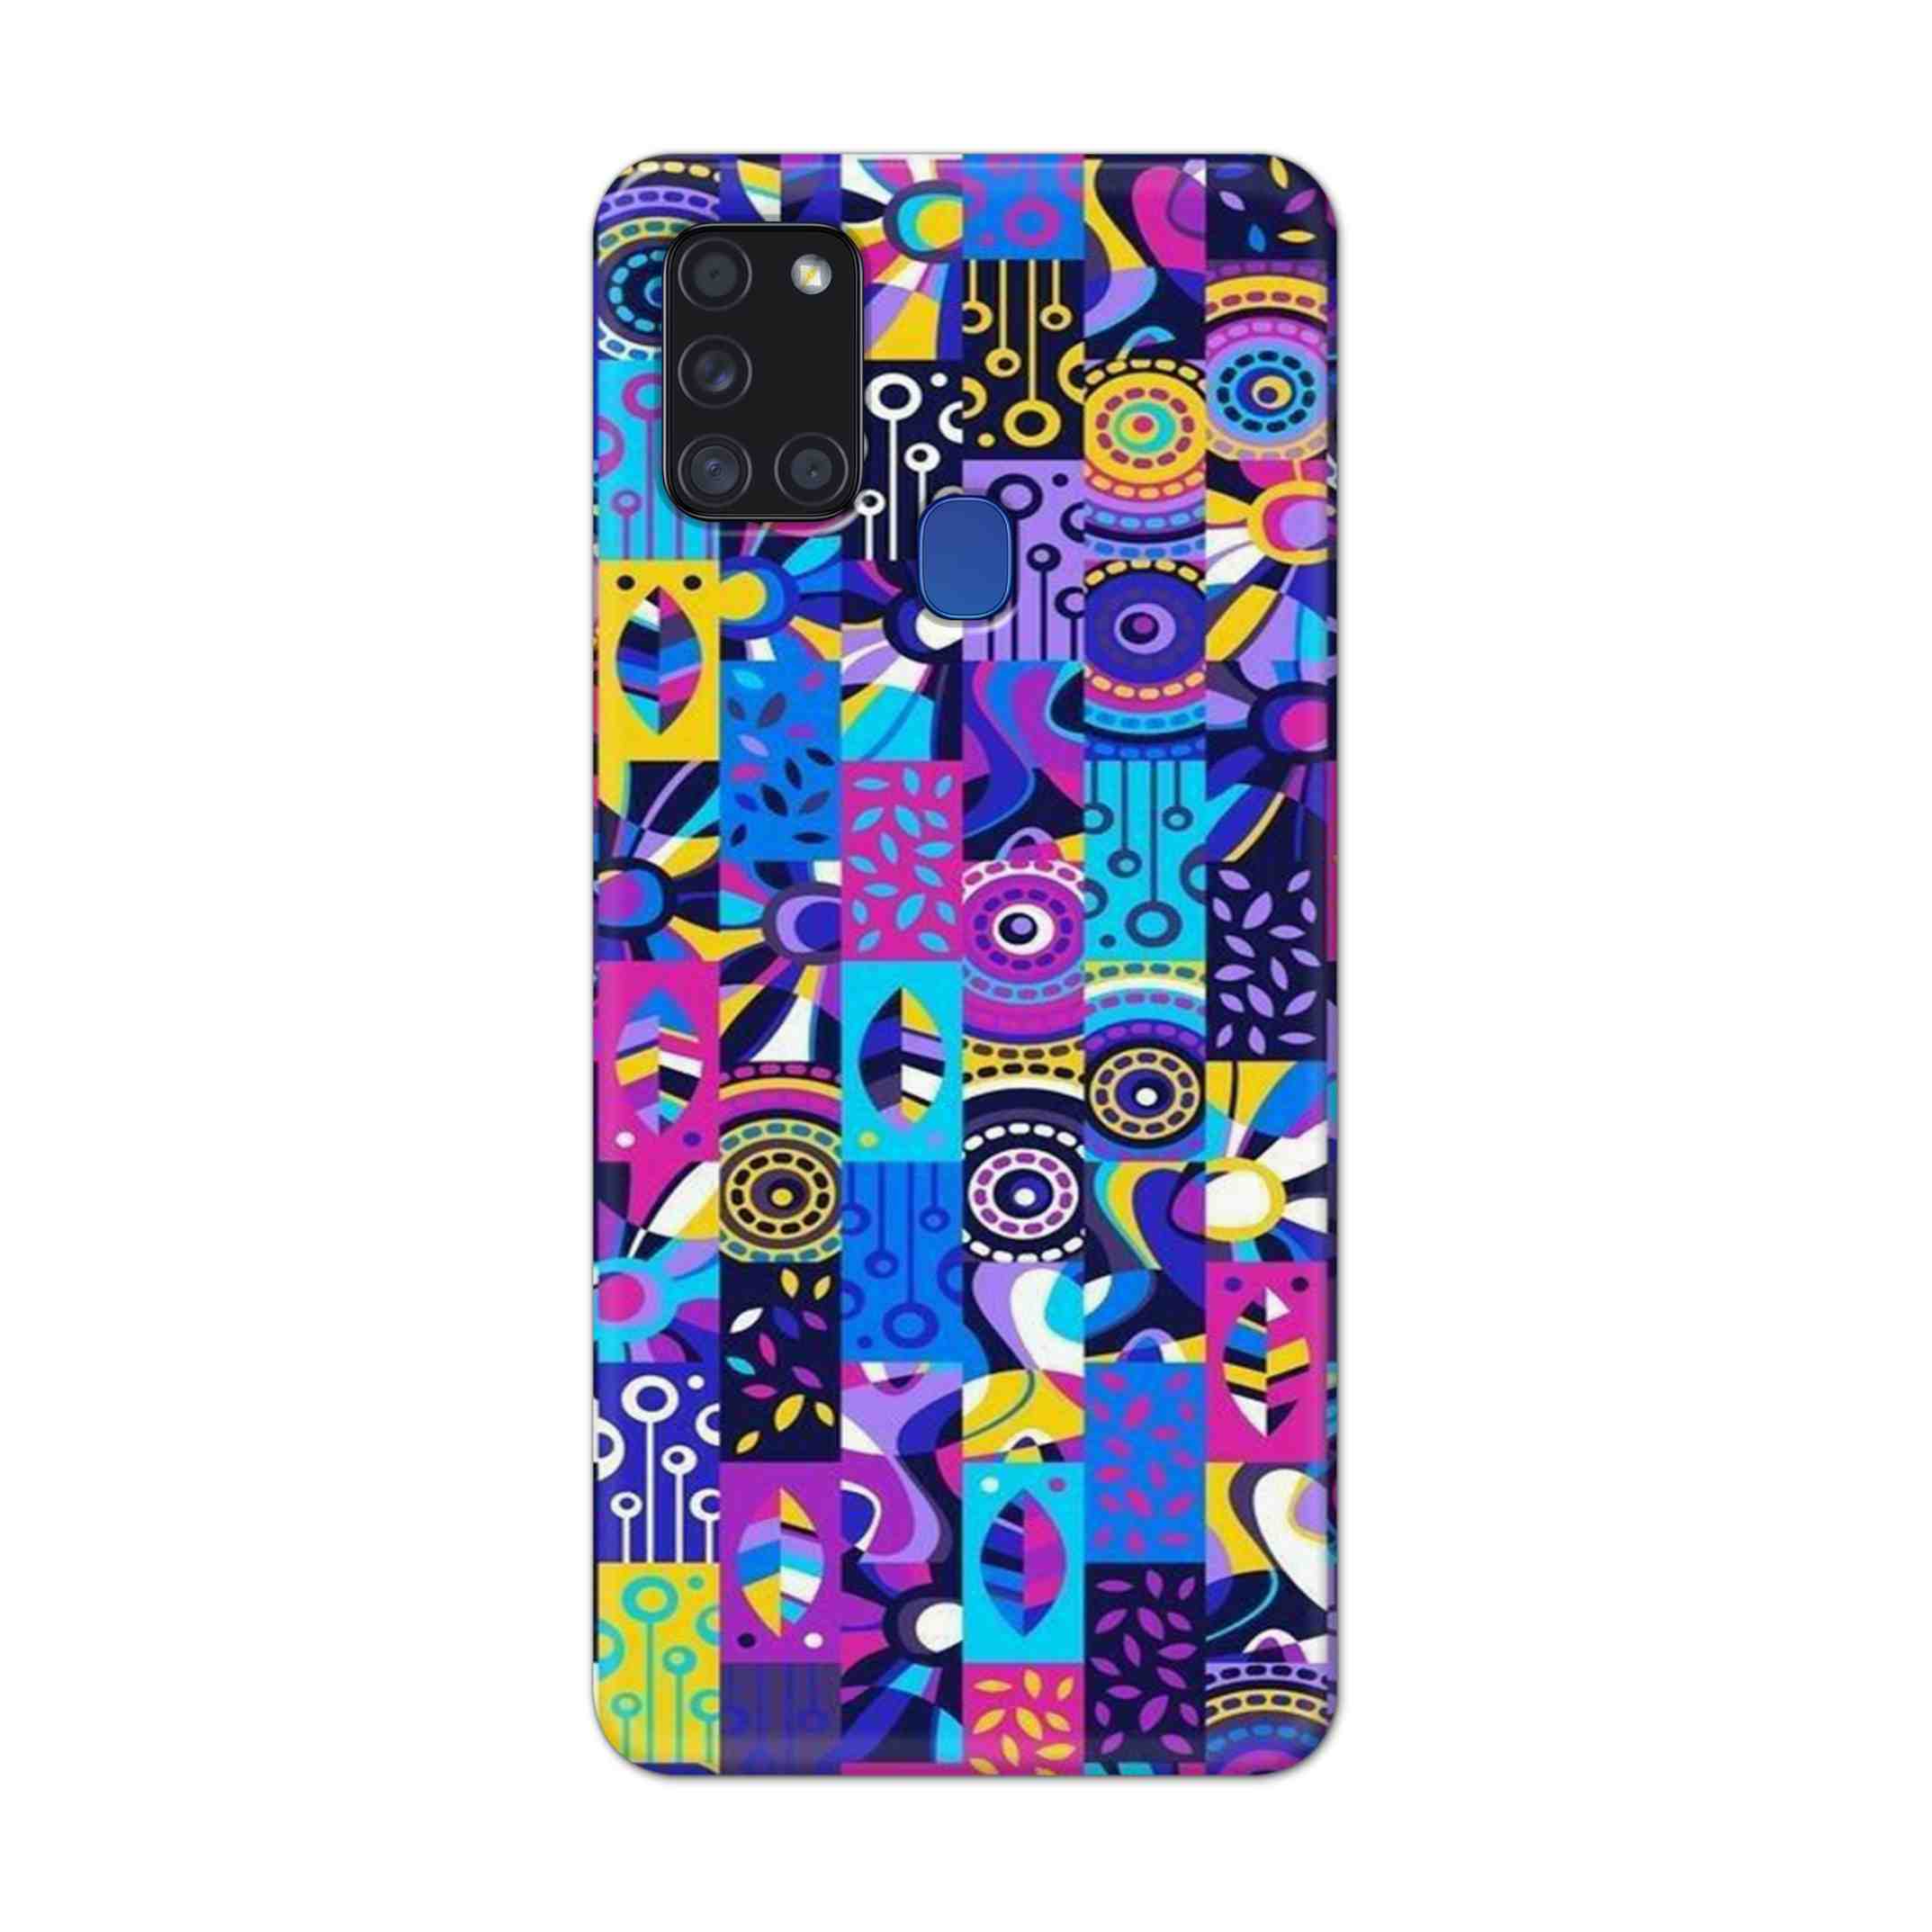 Buy Rainbow Art Hard Back Mobile Phone Case Cover For Samsung Galaxy A21s Online